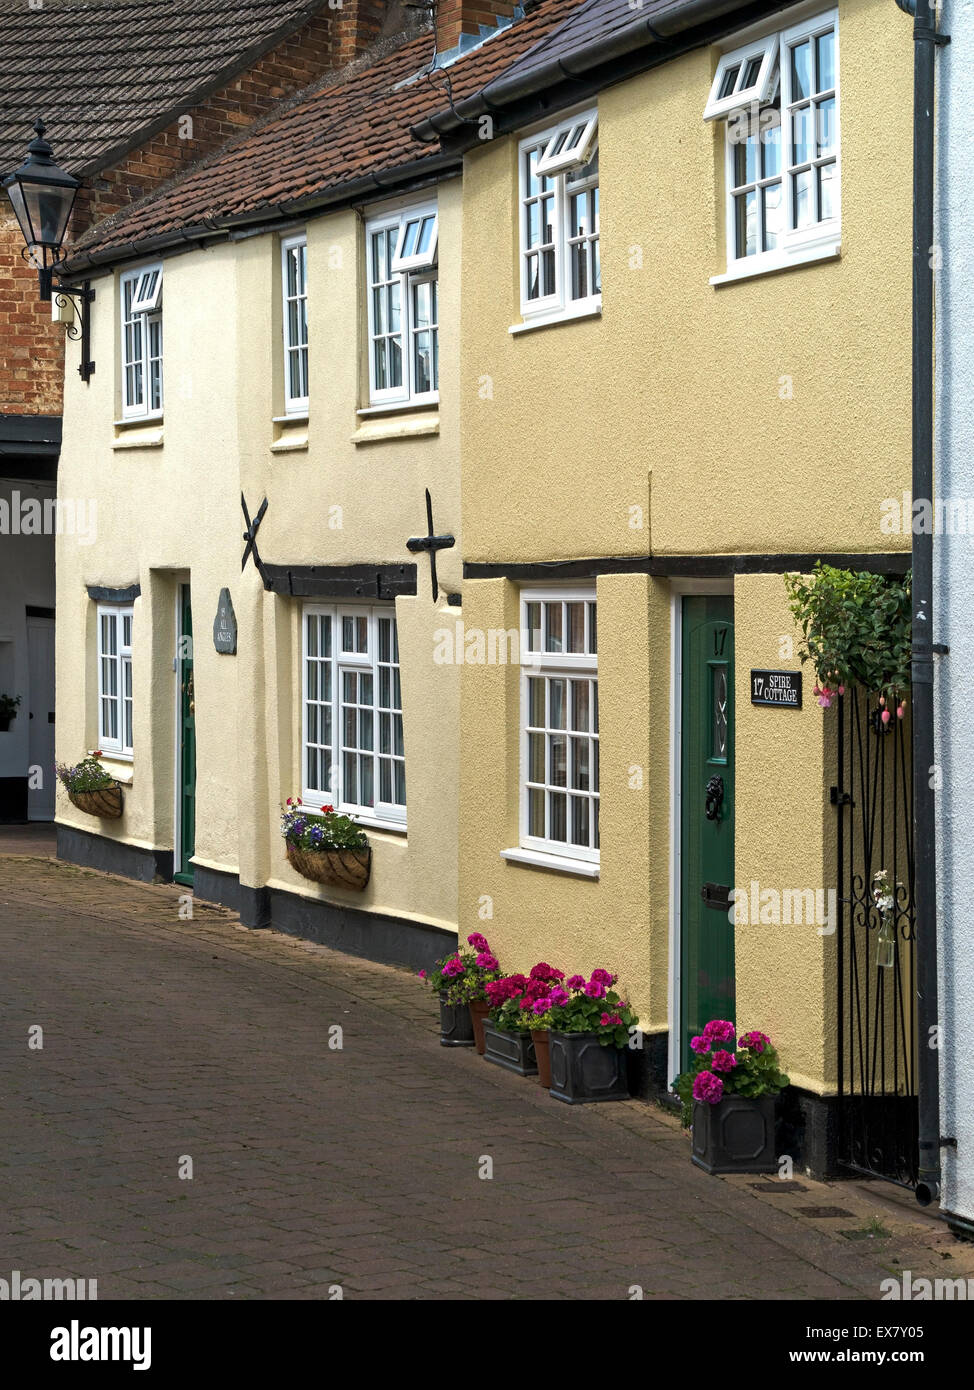 Row of pretty, old, painted, terraced cottages, Dean's Street, Oakham, Rutland, UK. Stock Photo